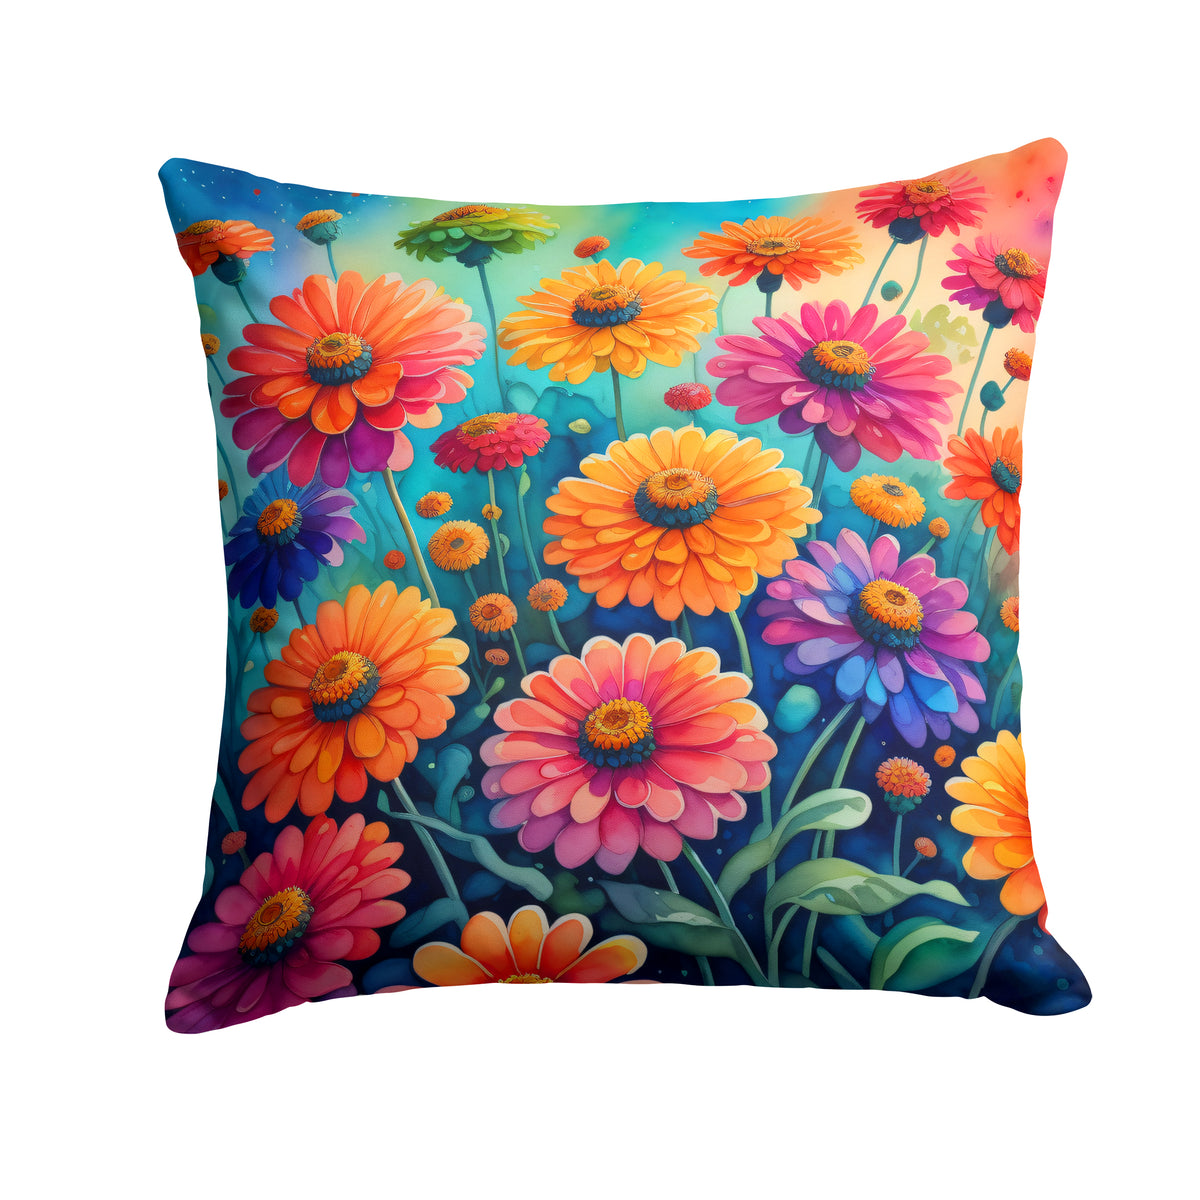 Buy this Colorful Zinnias Fabric Decorative Pillow